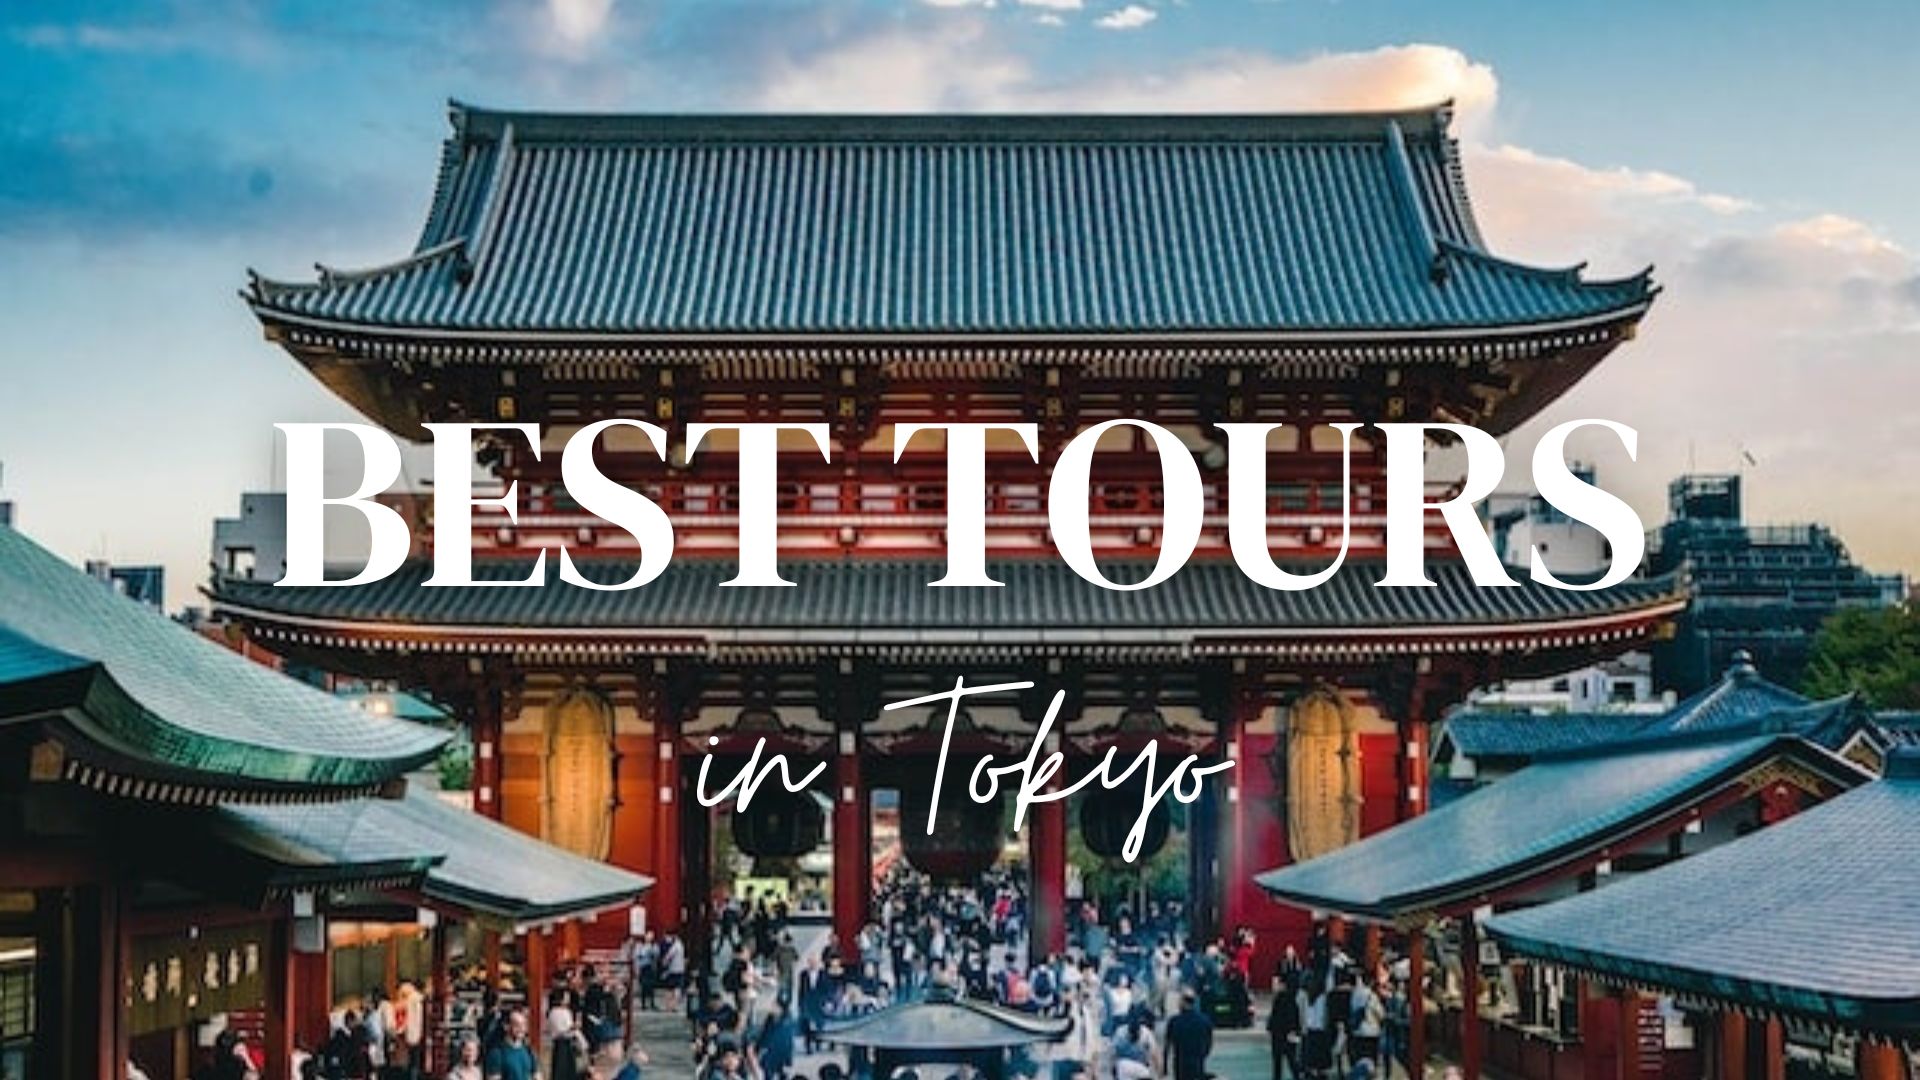 sightseeing tours from tokyo